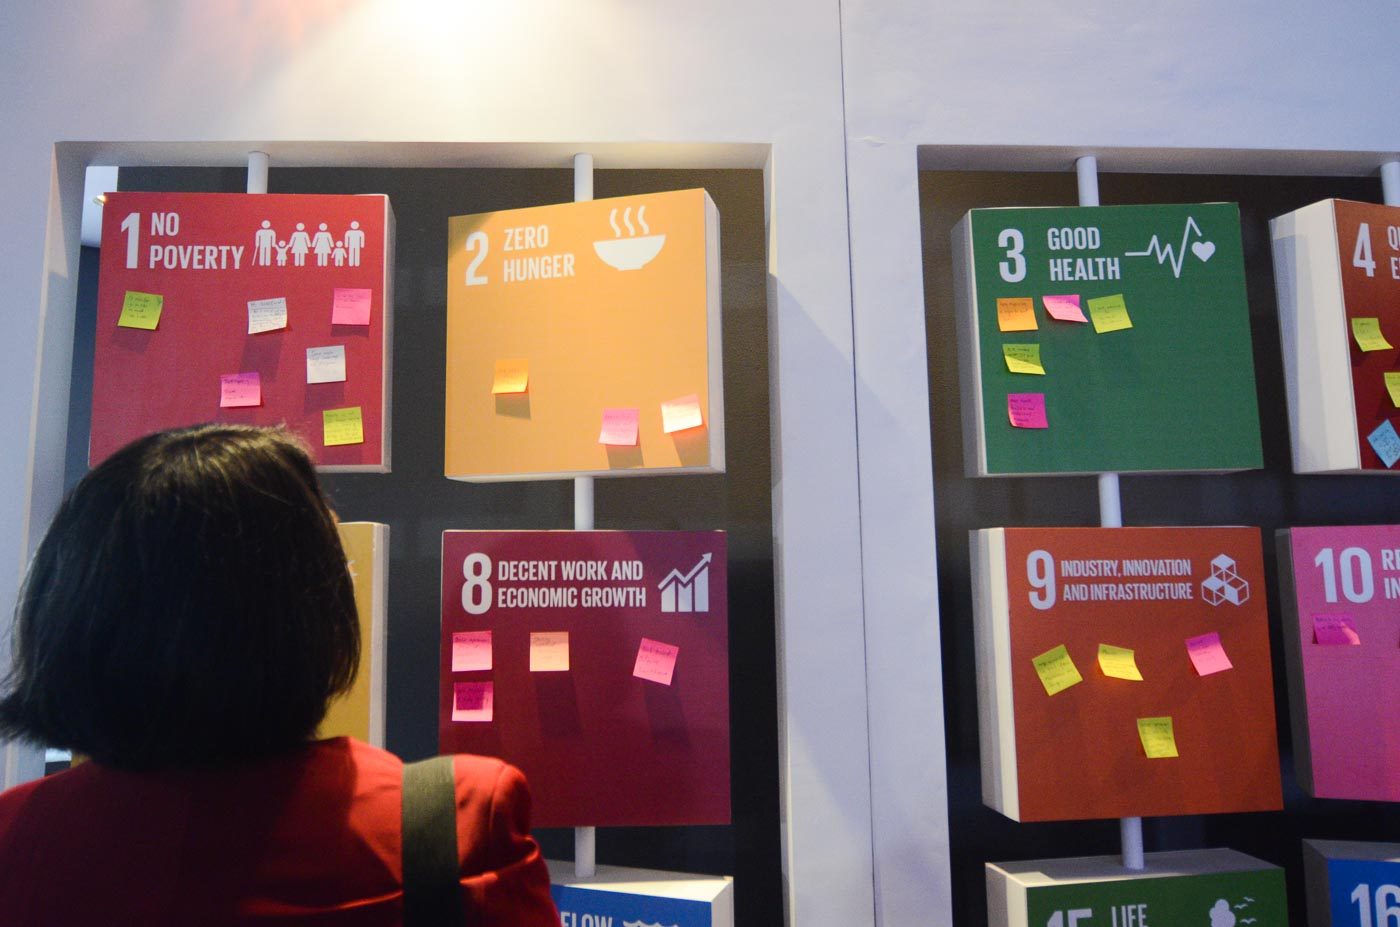 #SGS2015 exhibits provide practical applications of SDGs